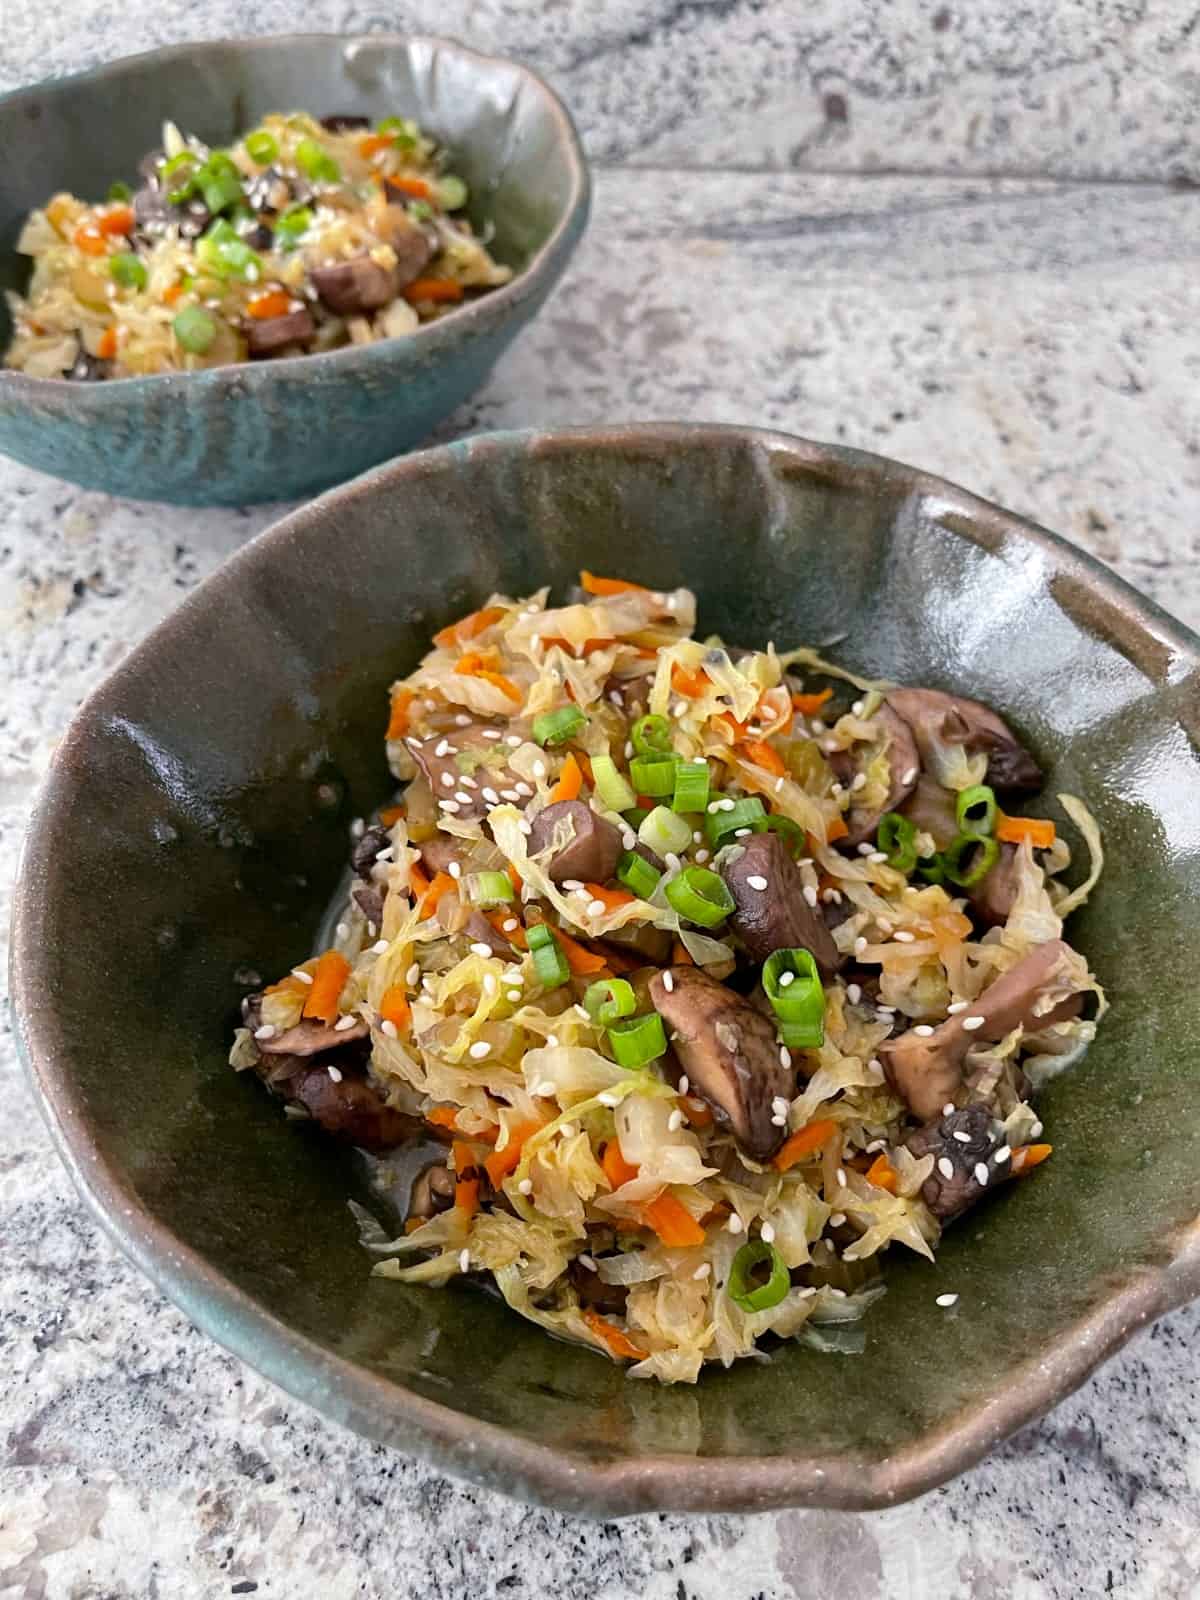 Instant pot vegetarian egg roll bowls topped with sesame seeds and sliced green onion in two green ceramic bowls.